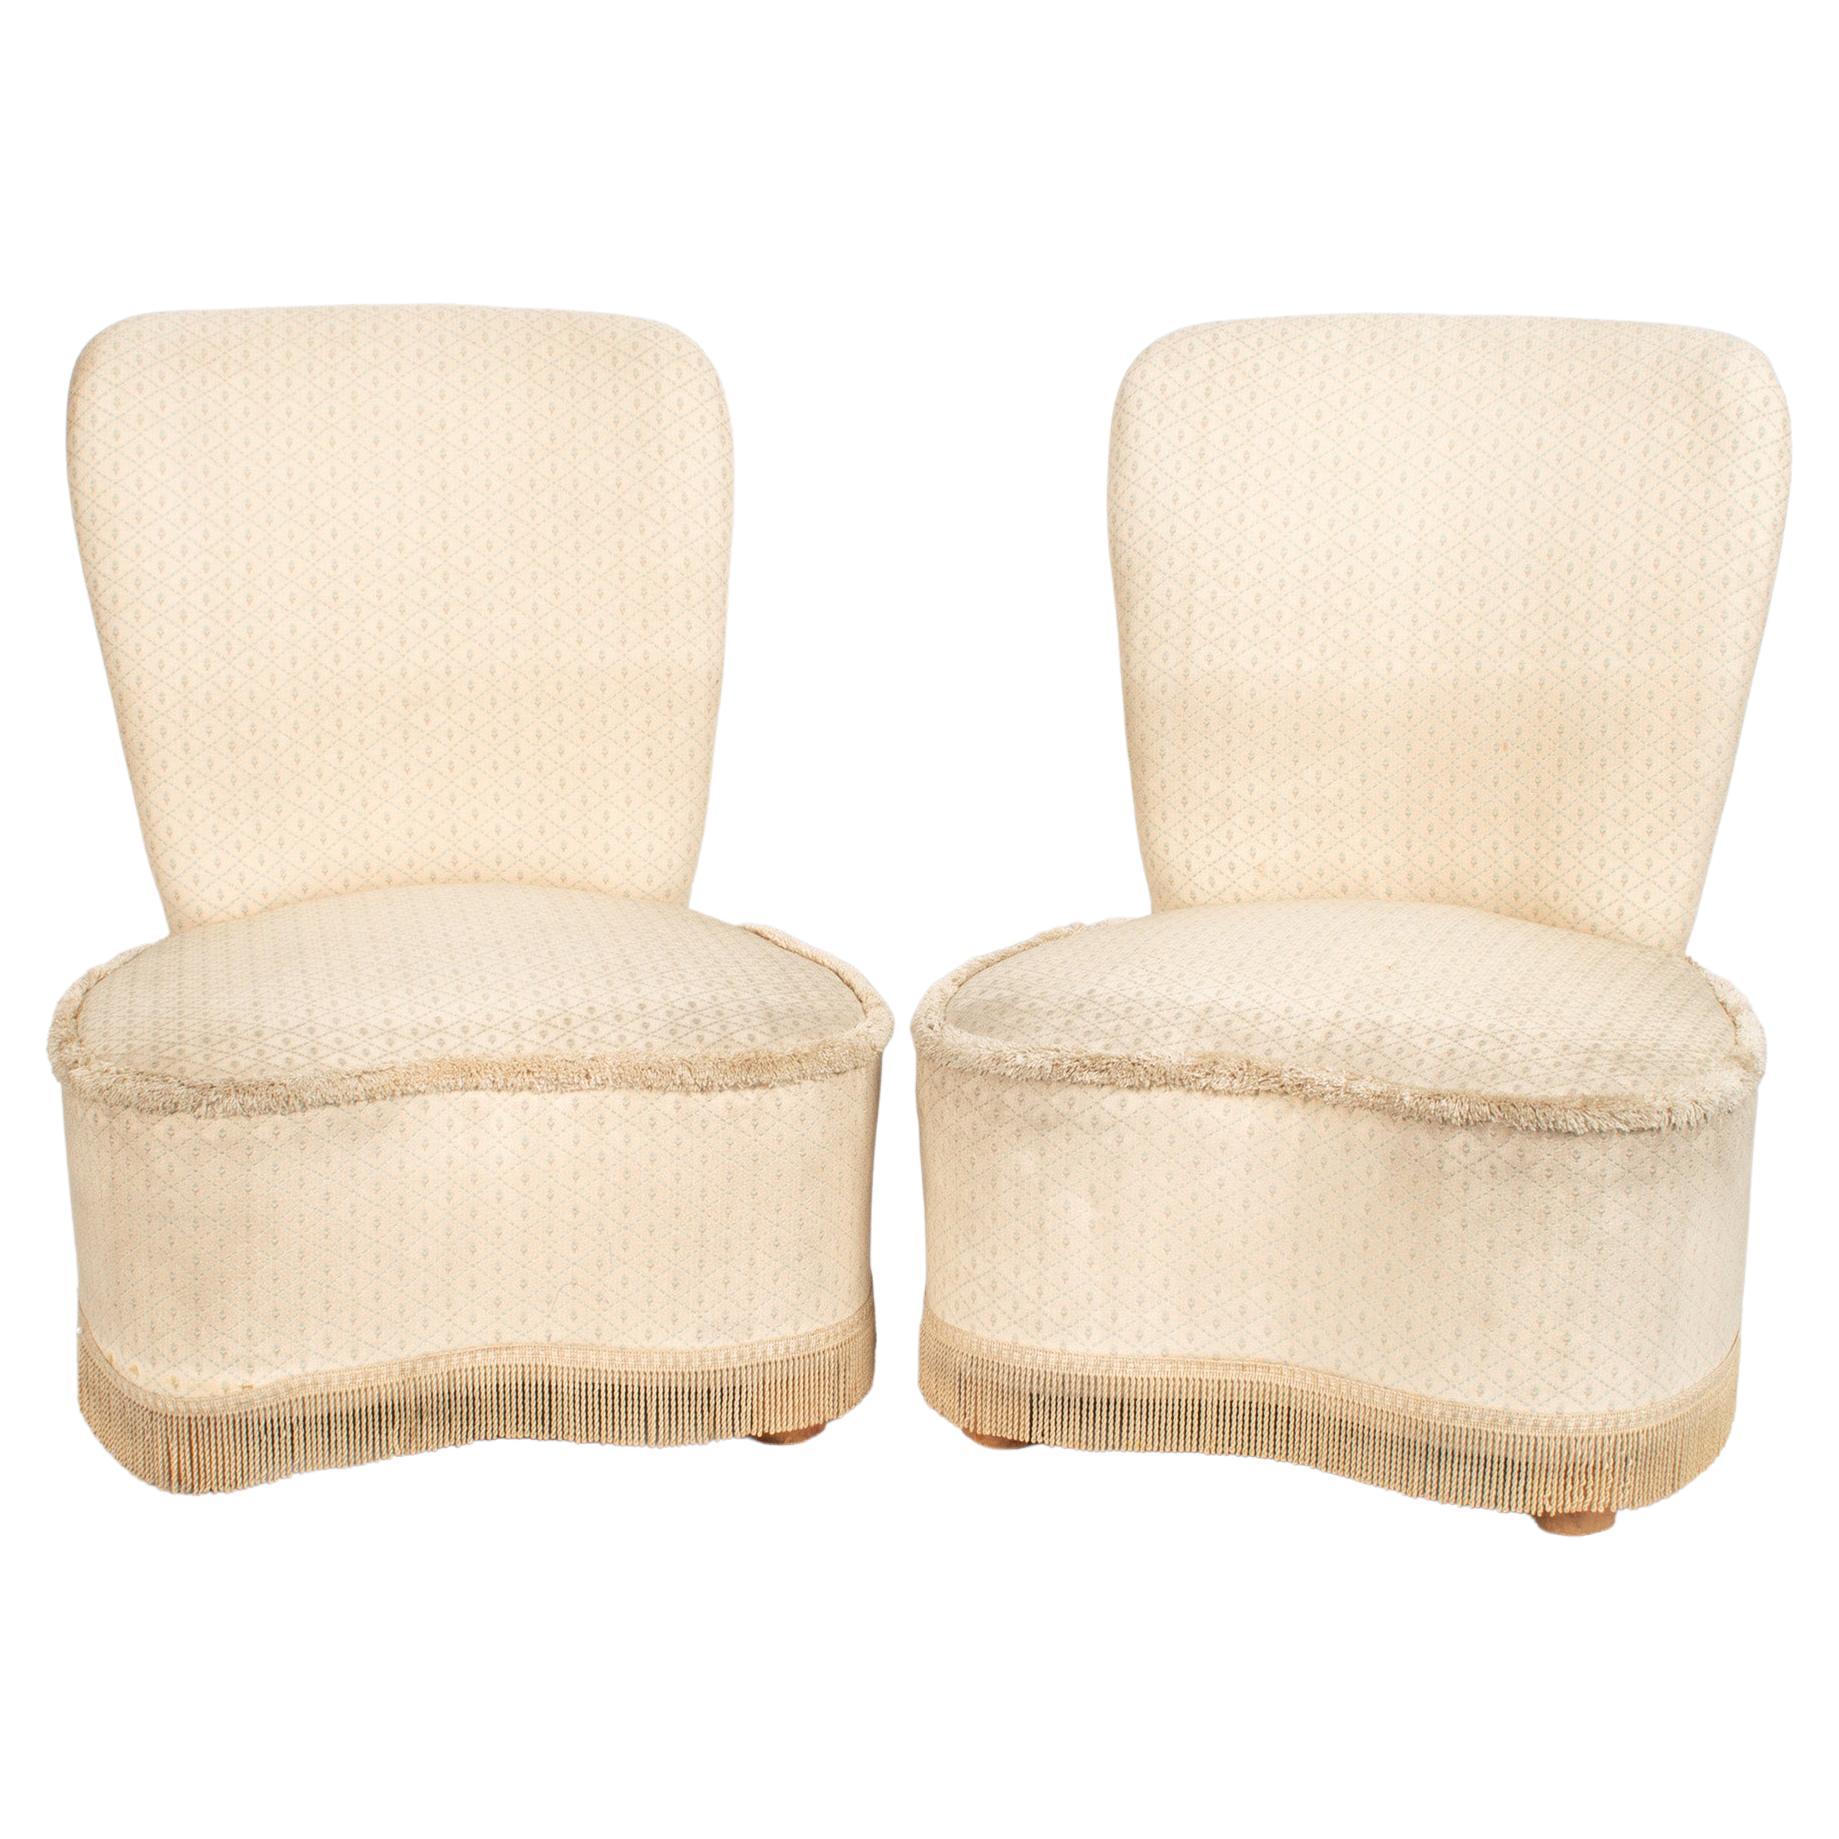 Pair of French Art Deco Upholstered Boudoir Chairs, C.1940 For Sale